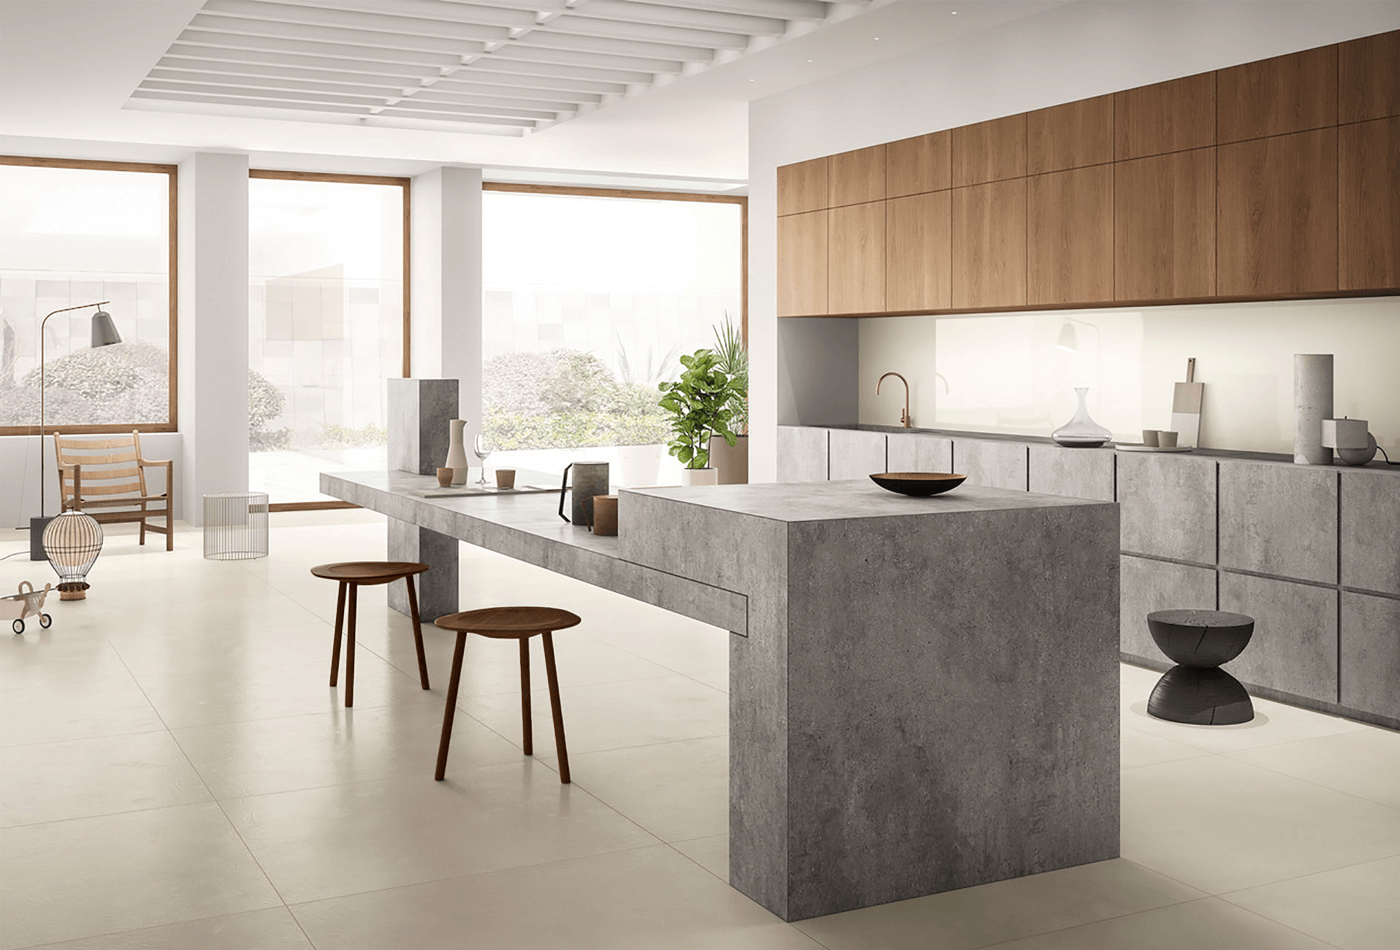 A Superior Kitchen Worktop Is Exclusively At Work-tops.com